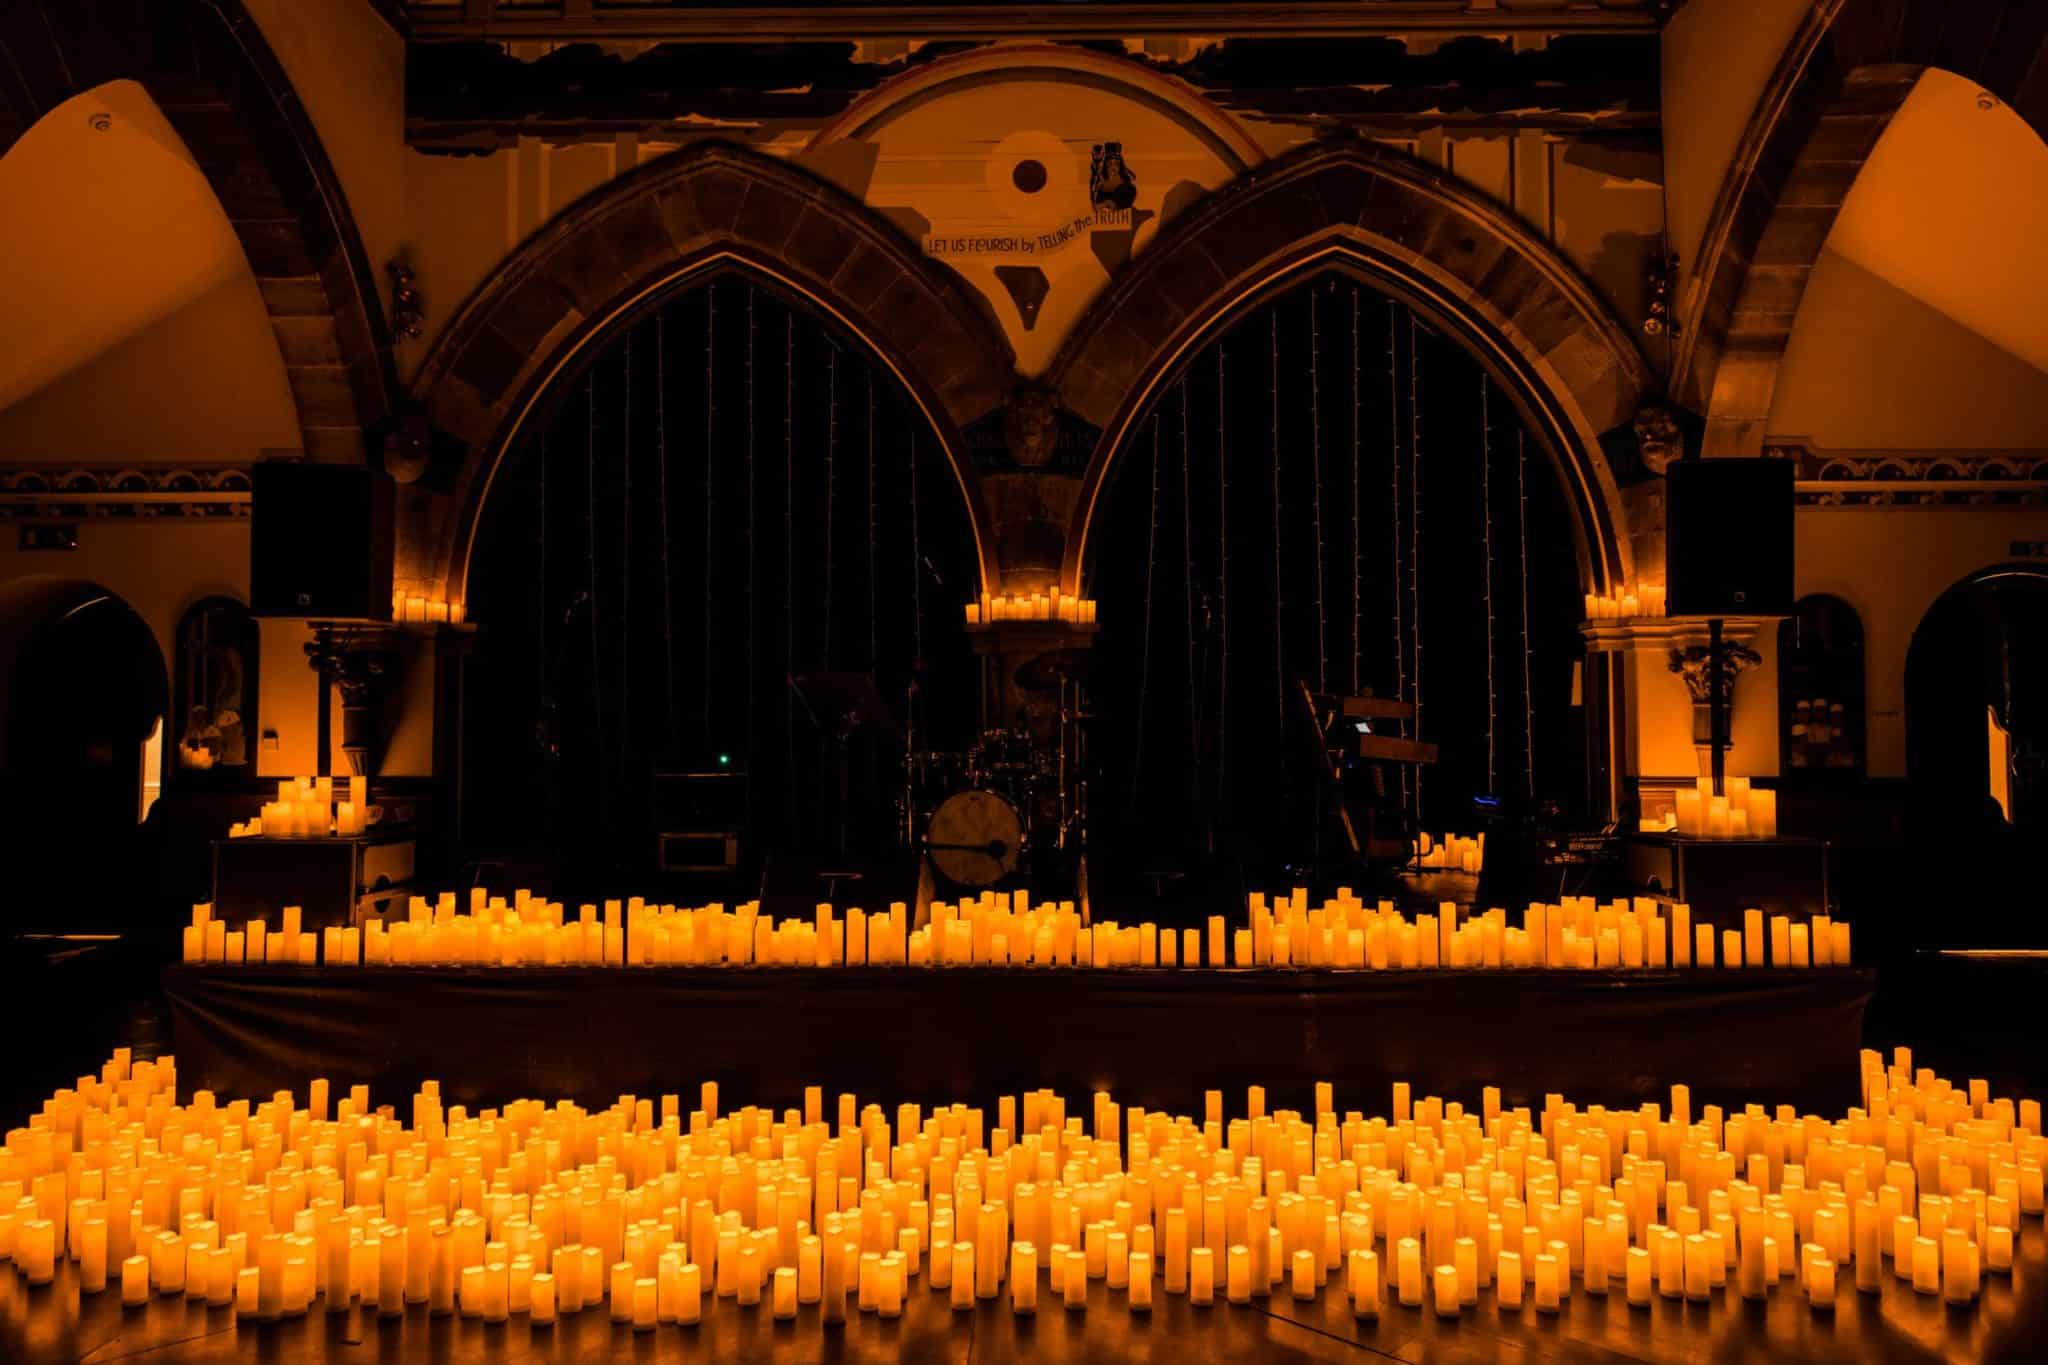 Hundreds of candles covering a stage inside Òran Mór for a Candlelight concert.